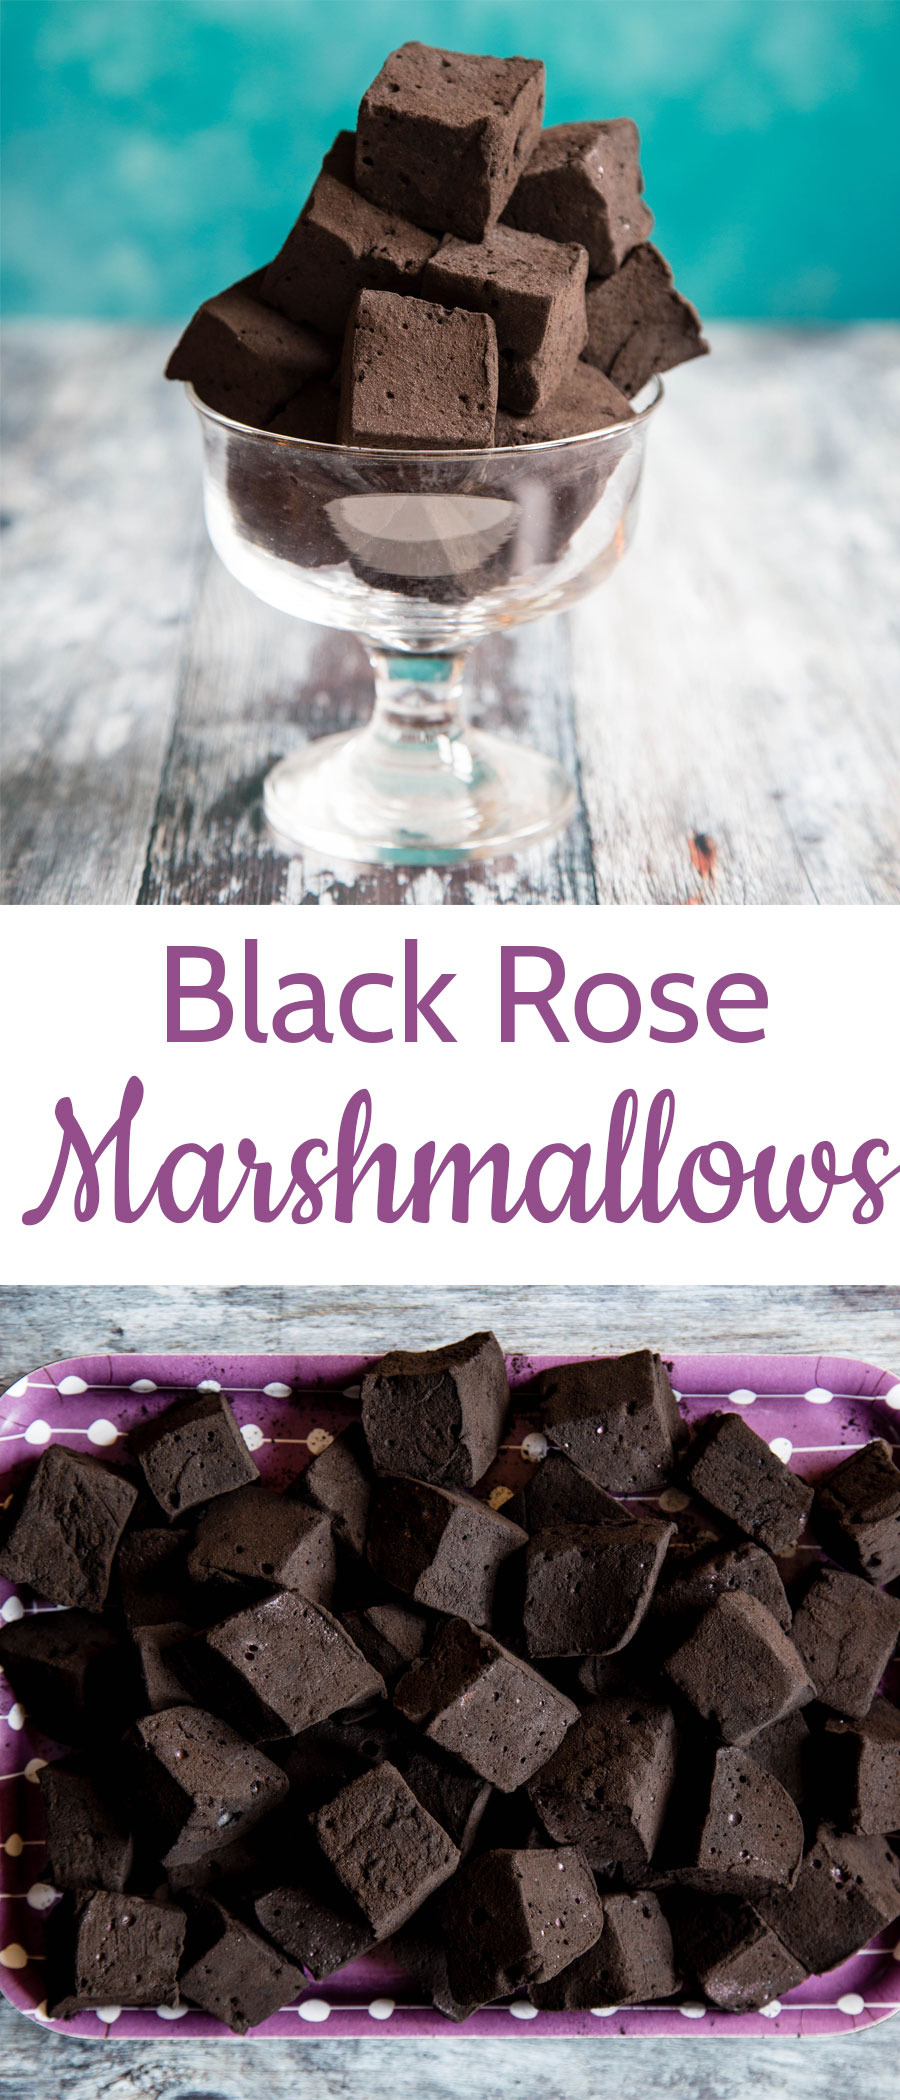 Homemade marshmallows are so much nicer than shop bought and simple to make with a stand mixer. My black rose marshmallows are delicious, and gothically on trend as well as really easy to make with the aid of a stand mixer. Ideal for your Valentine. 